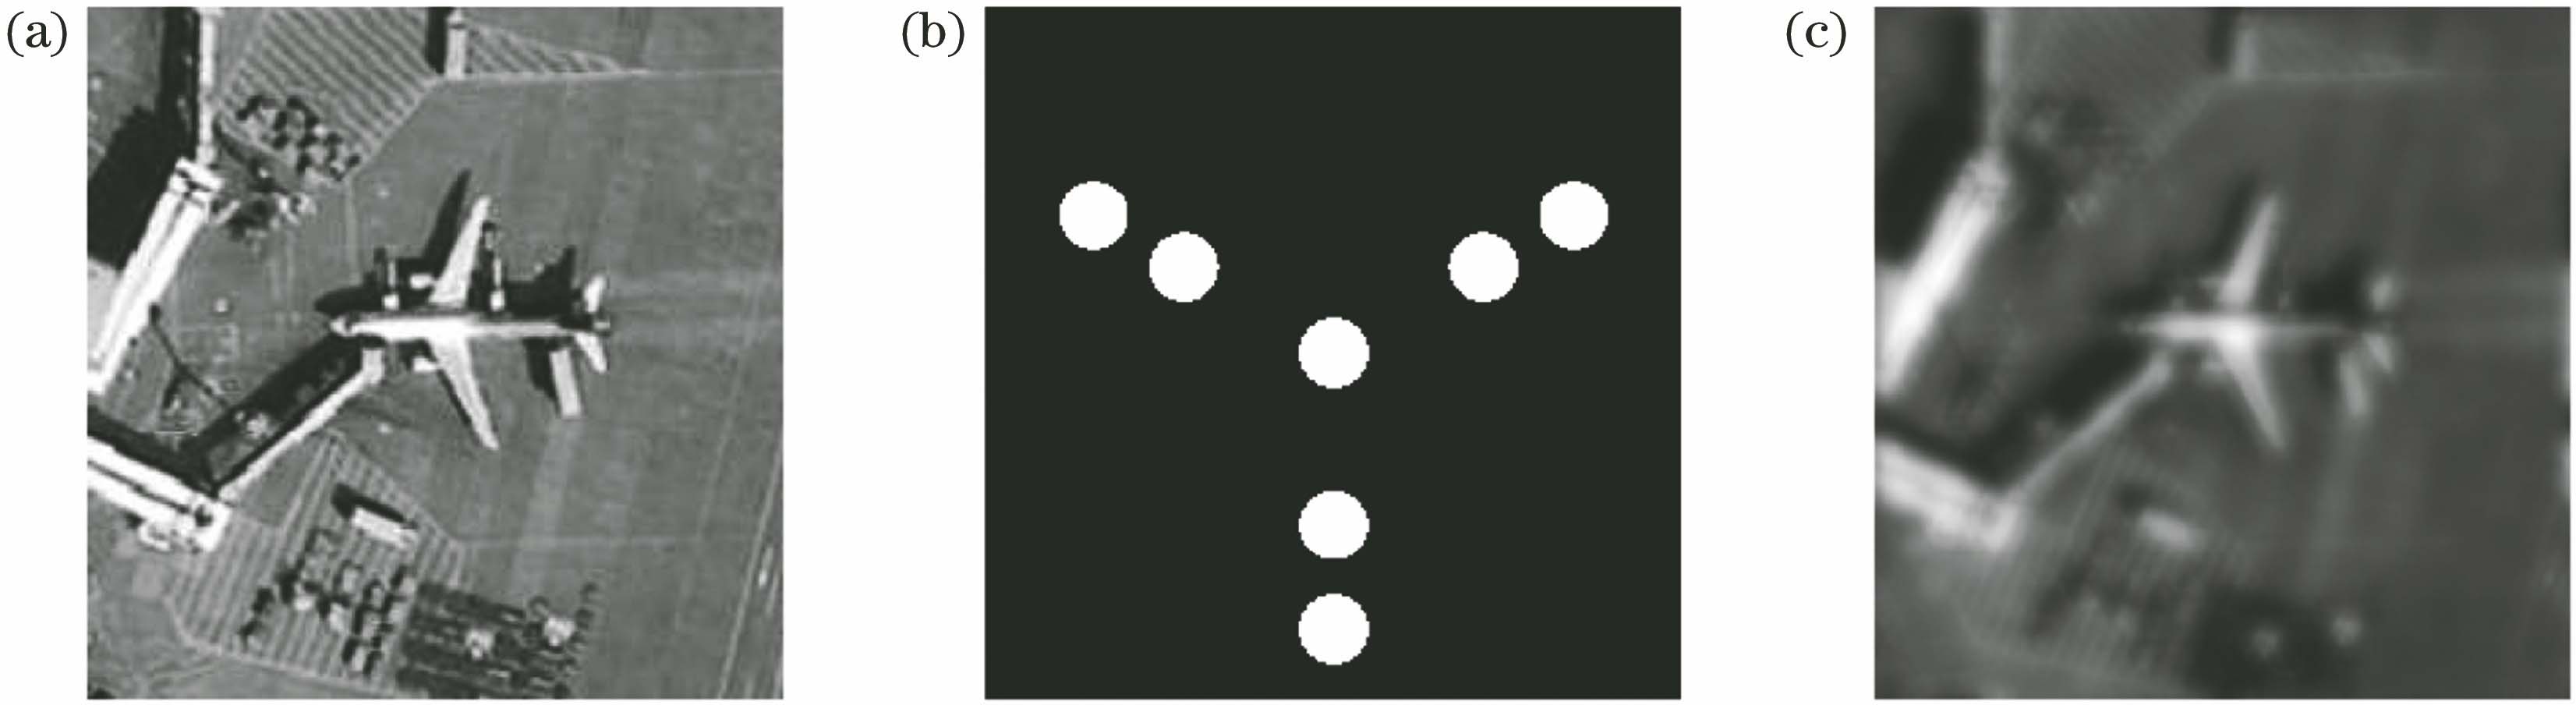 Imaging effect of optical synthetic aperture imaging system. (a) Original image; (b) image of synthetic aperture array distribution; (c) imaging map